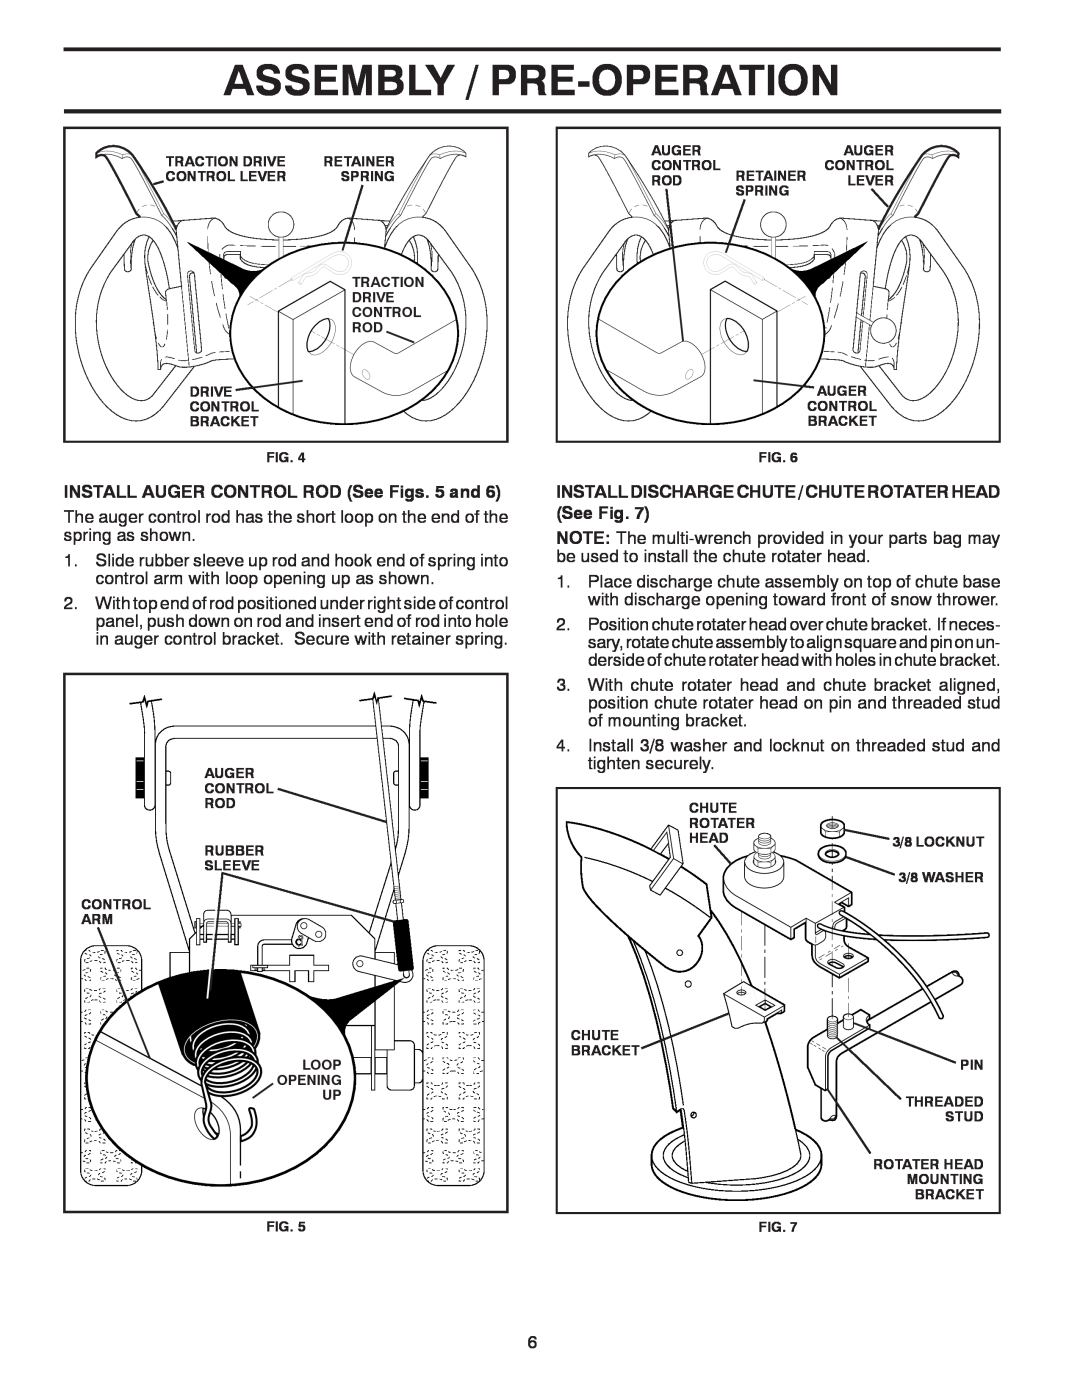 Poulan 185143 owner manual Assembly / Pre-Operation, INSTALL AUGER CONTROL ROD See Figs. 5 and 